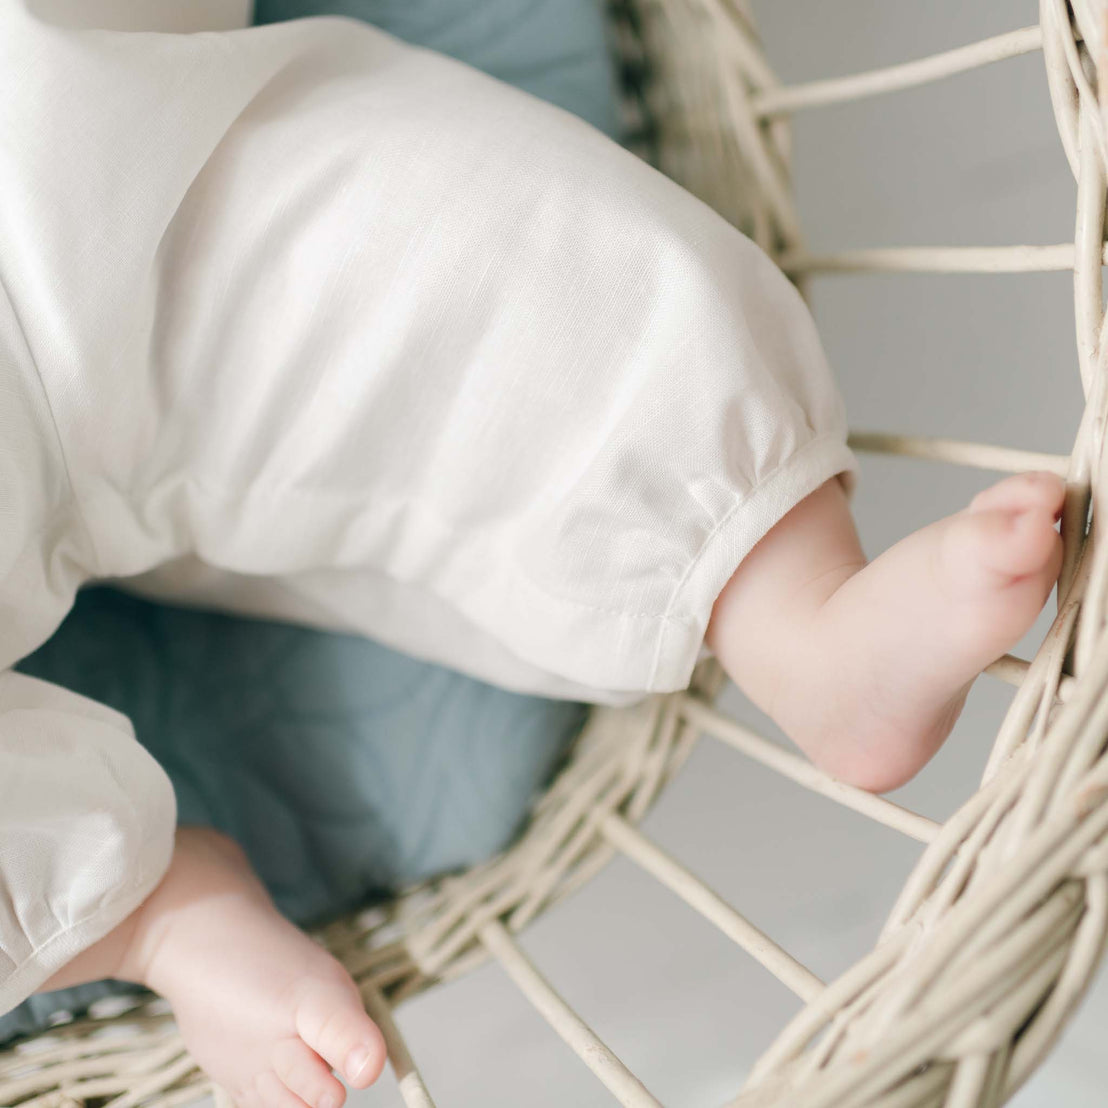 Close-up image of a baby’s legs and feet wearing an Owen Linen Christening Romper, sitting in a white wicker chair. The baby is resting on a blue cushion. Only the lower part of the baby's body is visible.